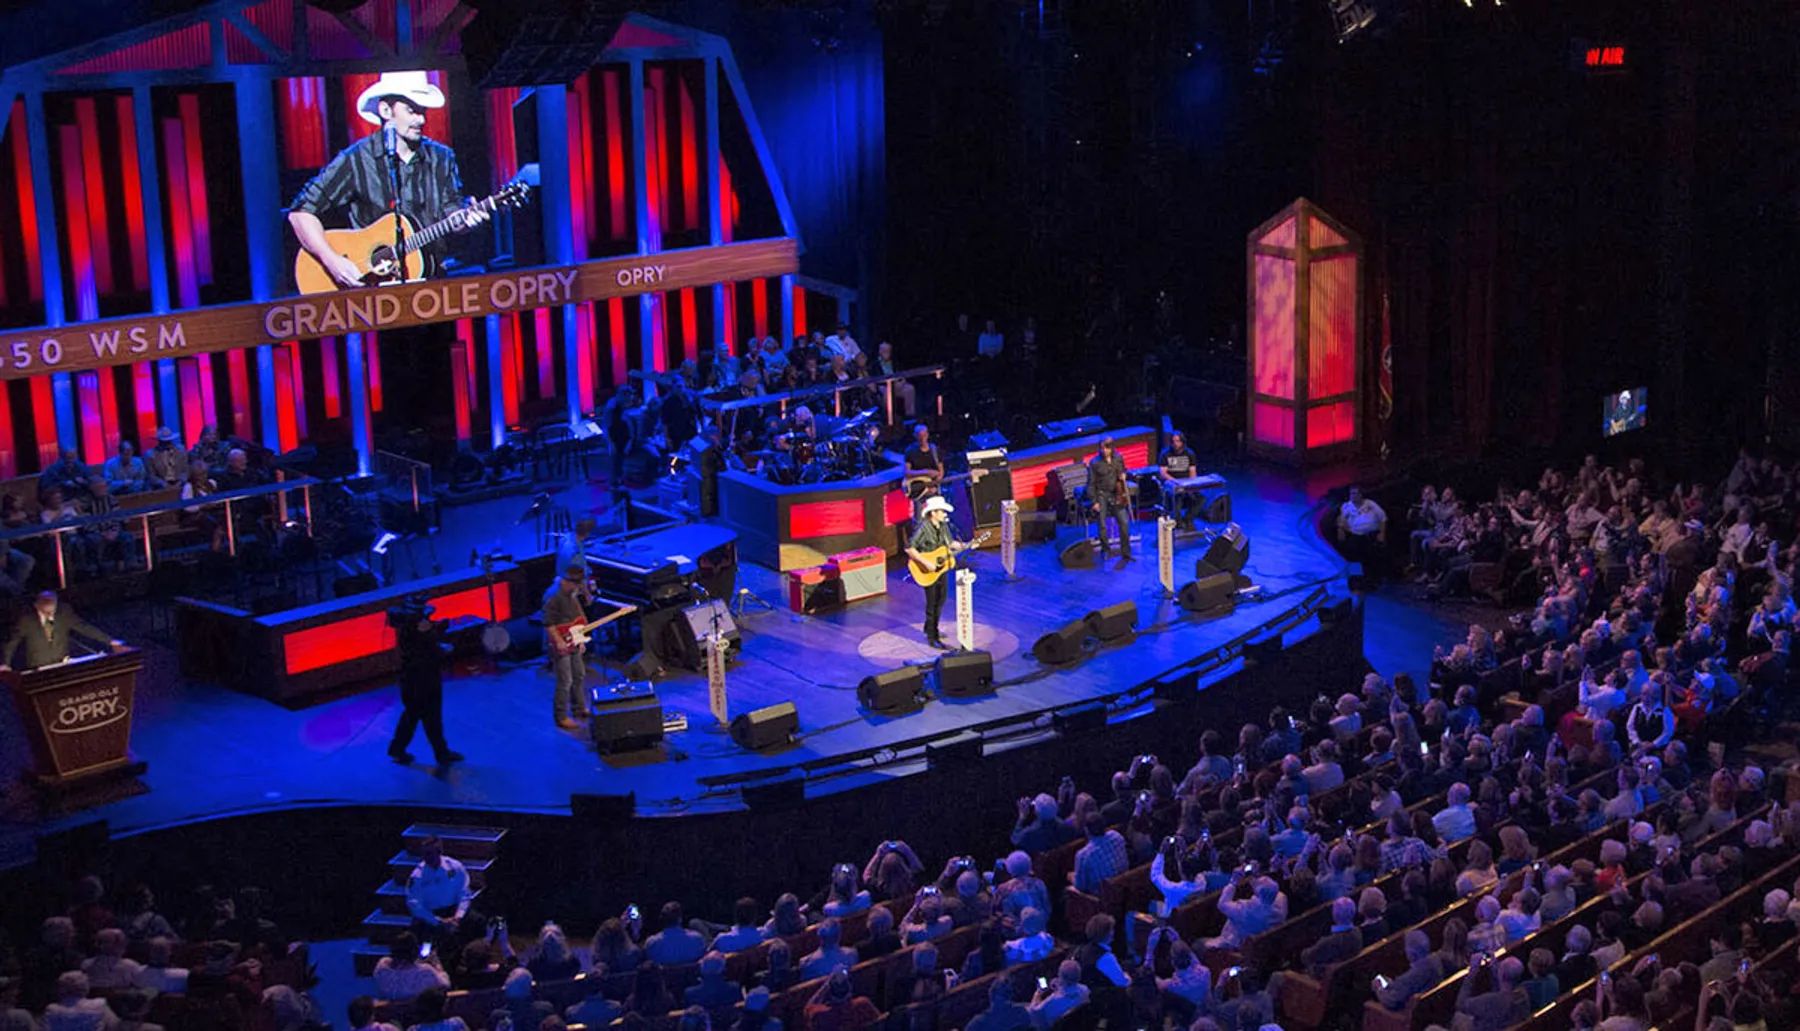 A musician donning a cowboy hat performs on stage at the Grand Ole Opry while the audience enjoys the live country music show.